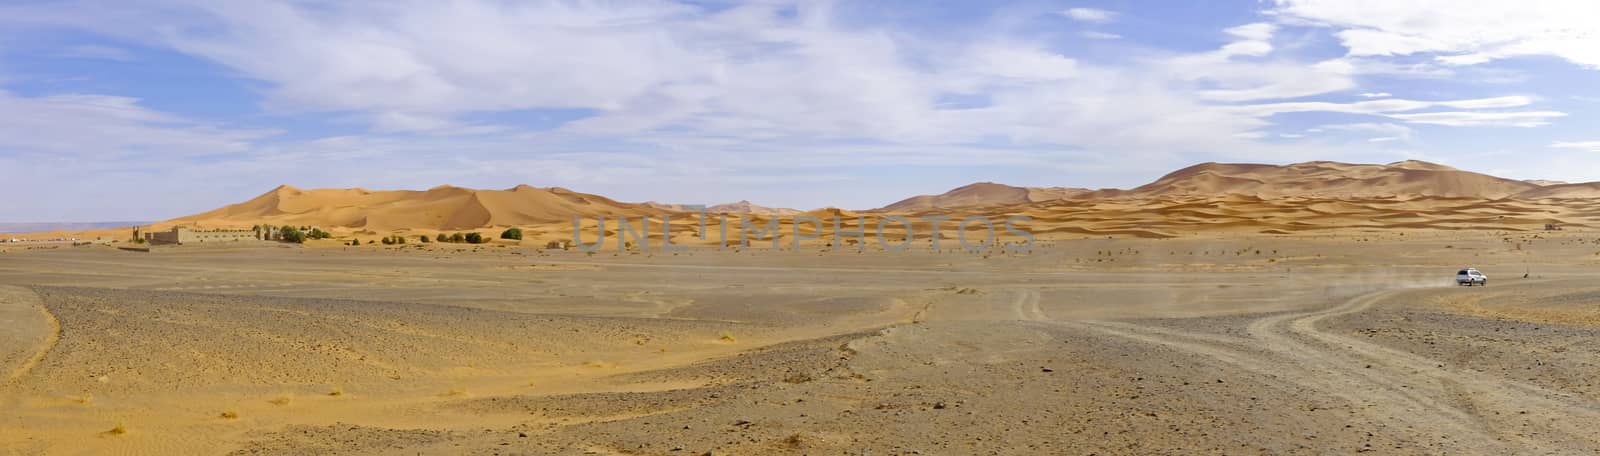 Panorama from the Erg Chebbi desert in Maroc Africa by devy